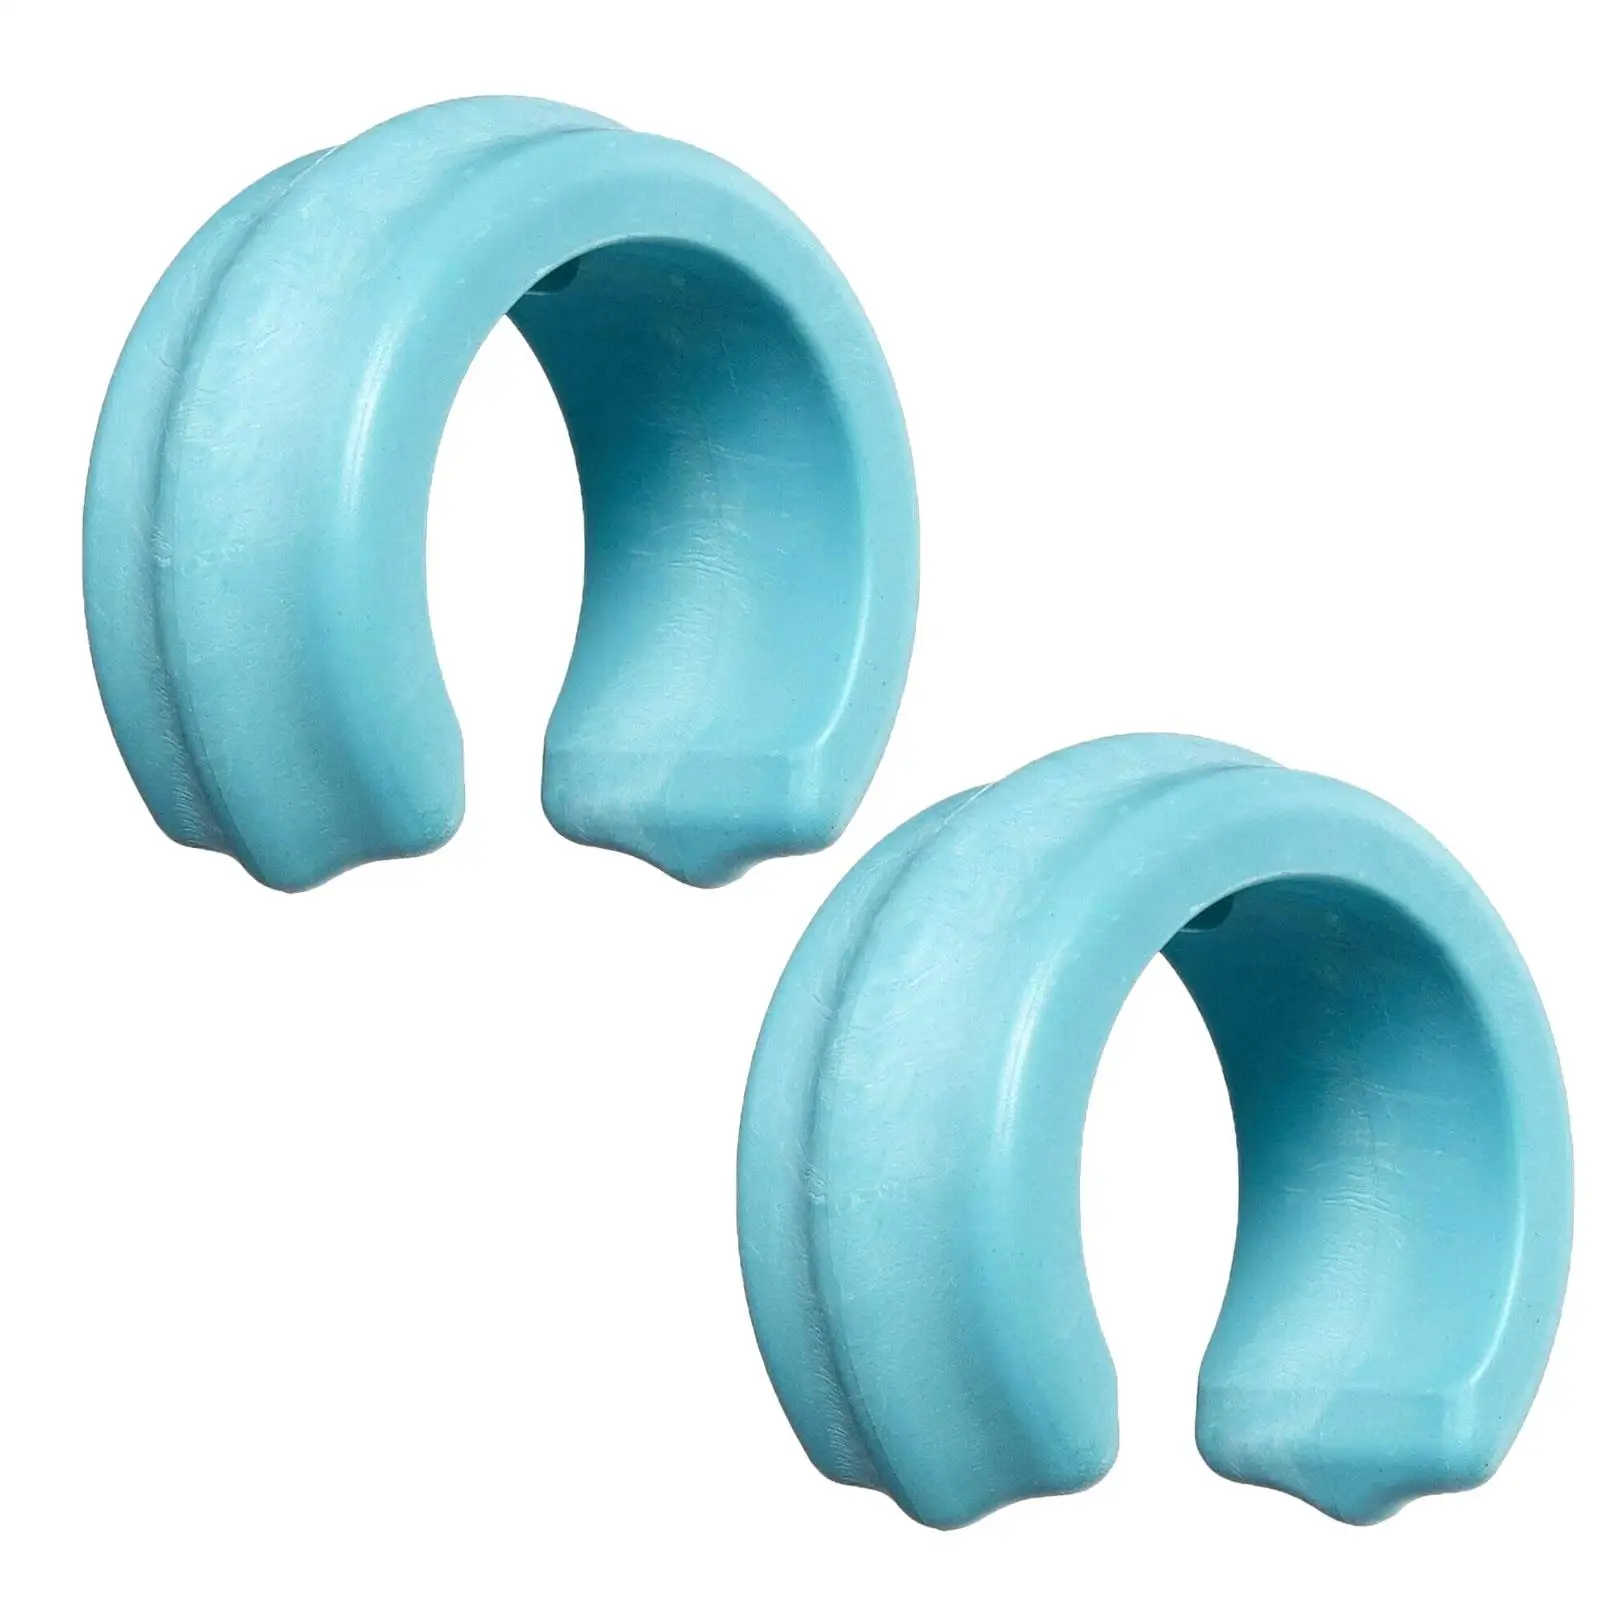 2x Universal Pool Hose Weight Practical Durable Material Swimming Pool Accessories for x70105 Pool Cleaning Tools Accessories